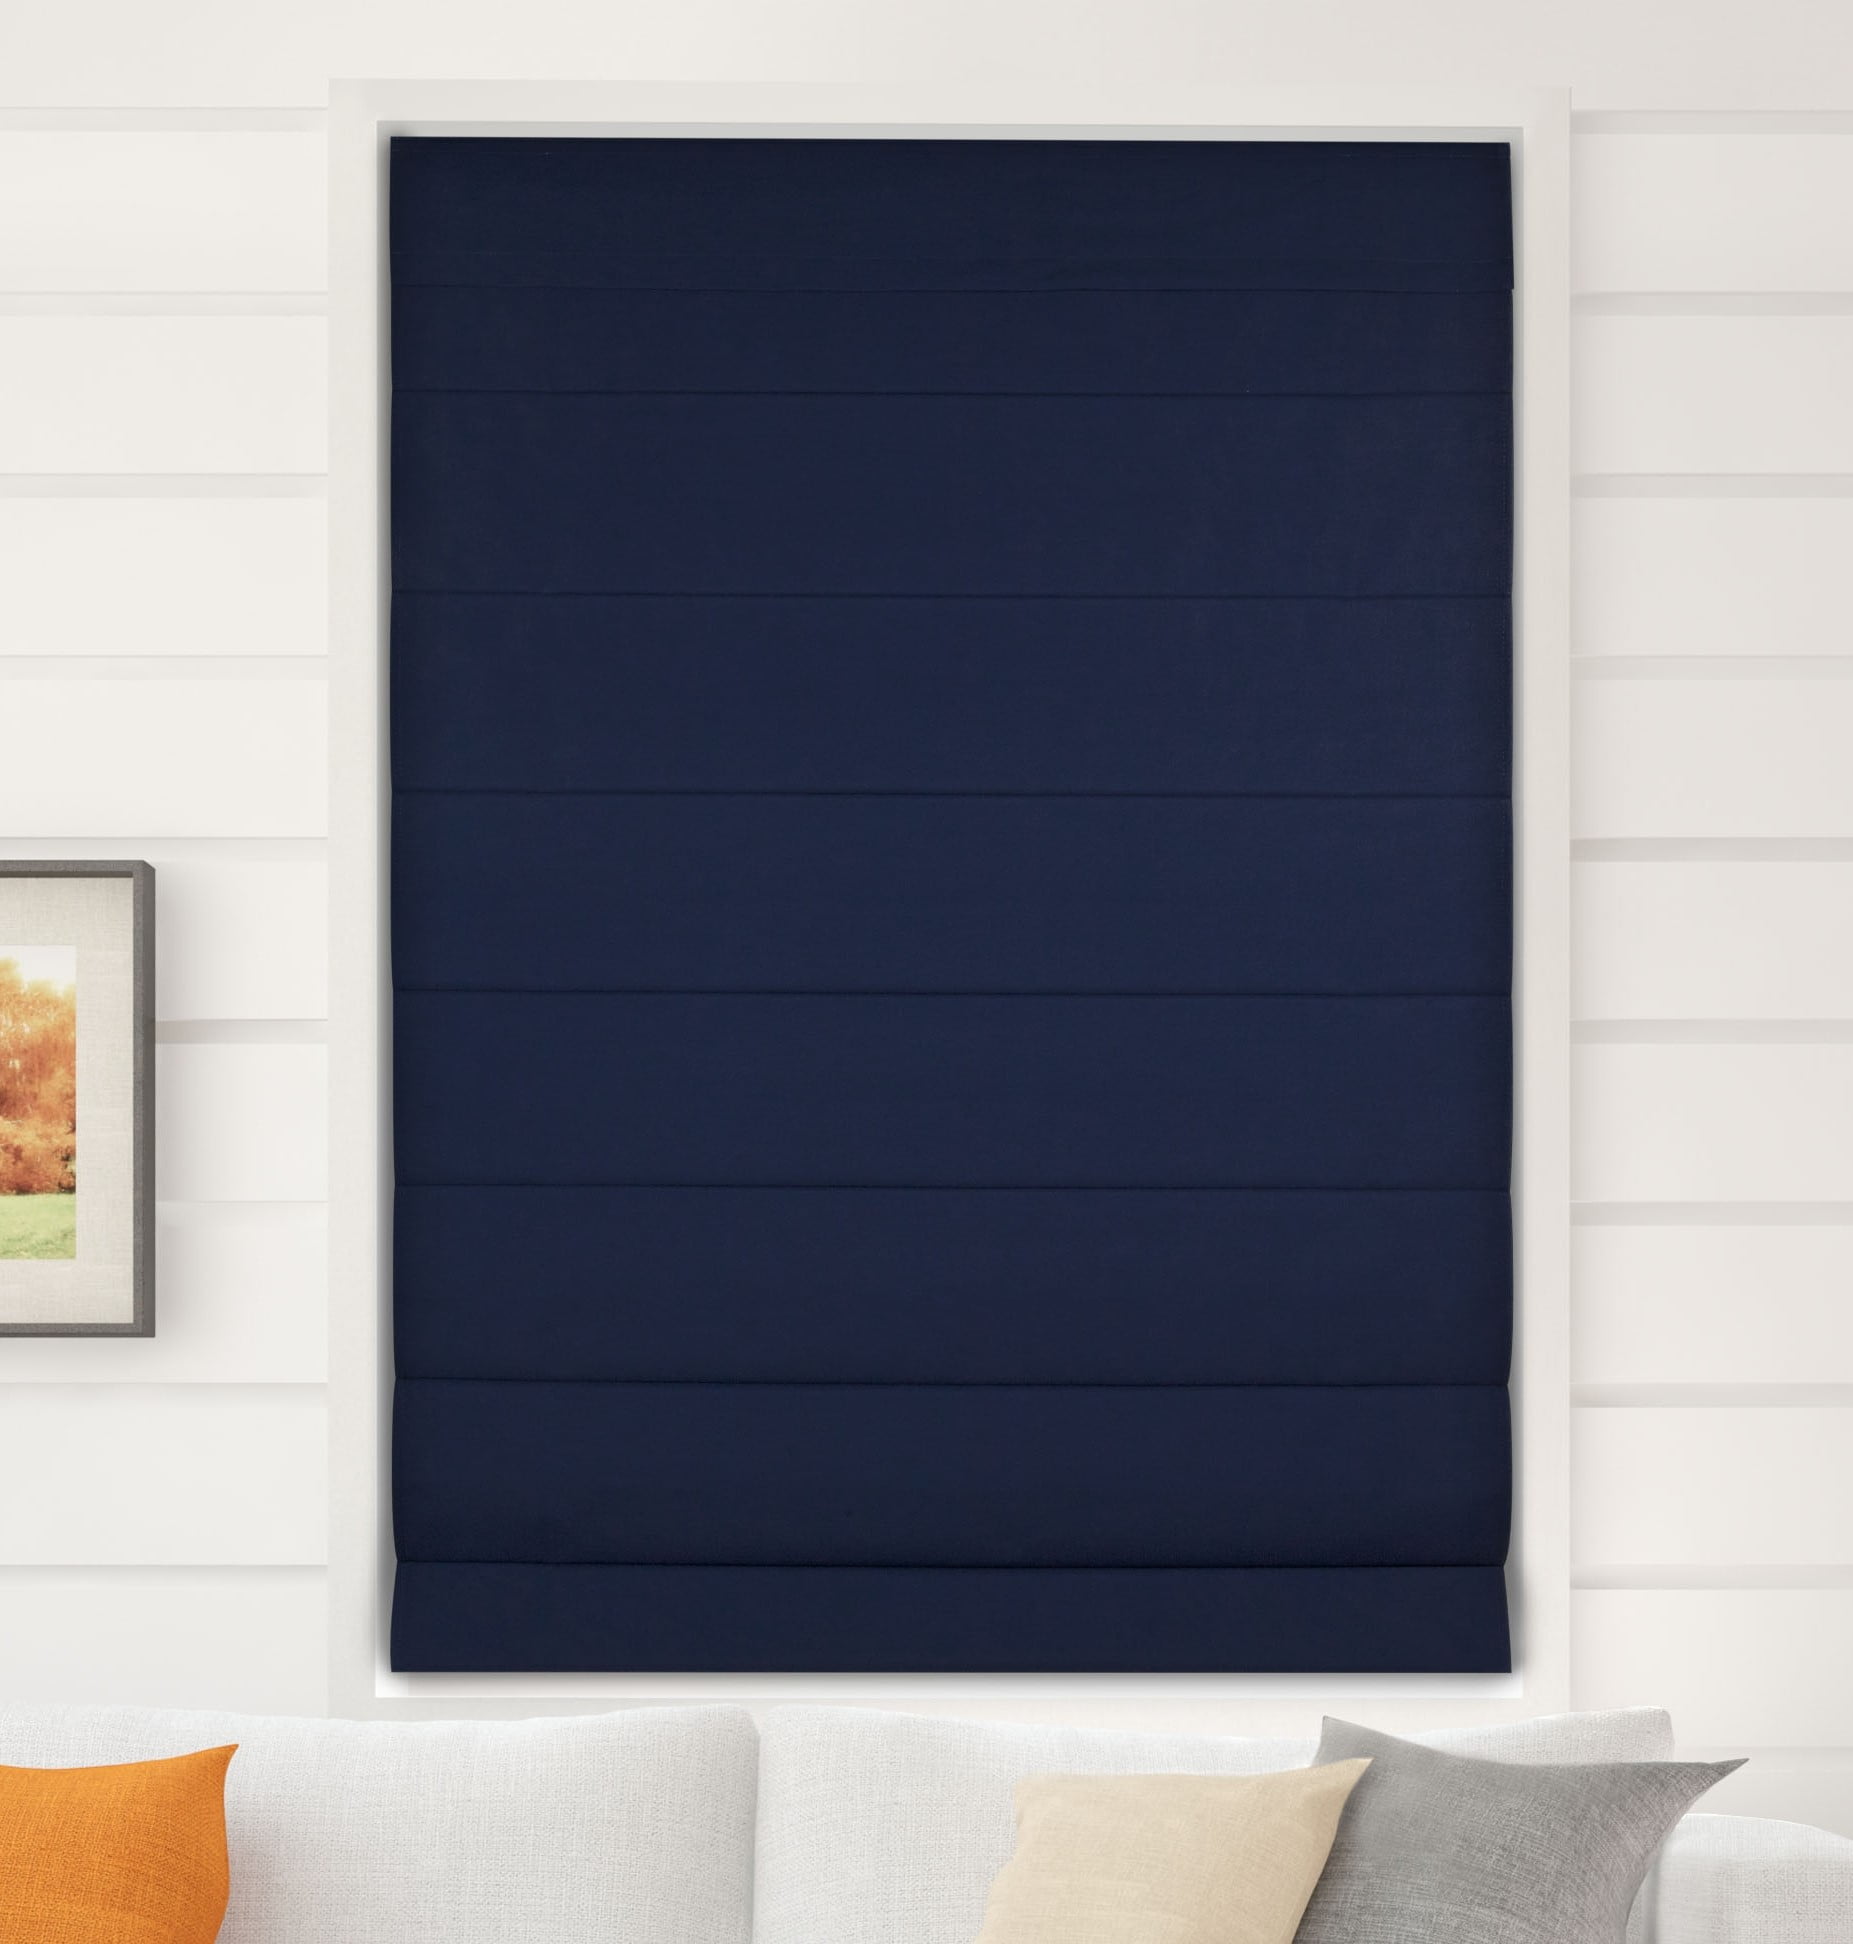 Size: 34 W X 72 H Cordless Lift Window Blinds Color: White Arlo Blinds Thermal Room Darkening Fabric Roman Shades